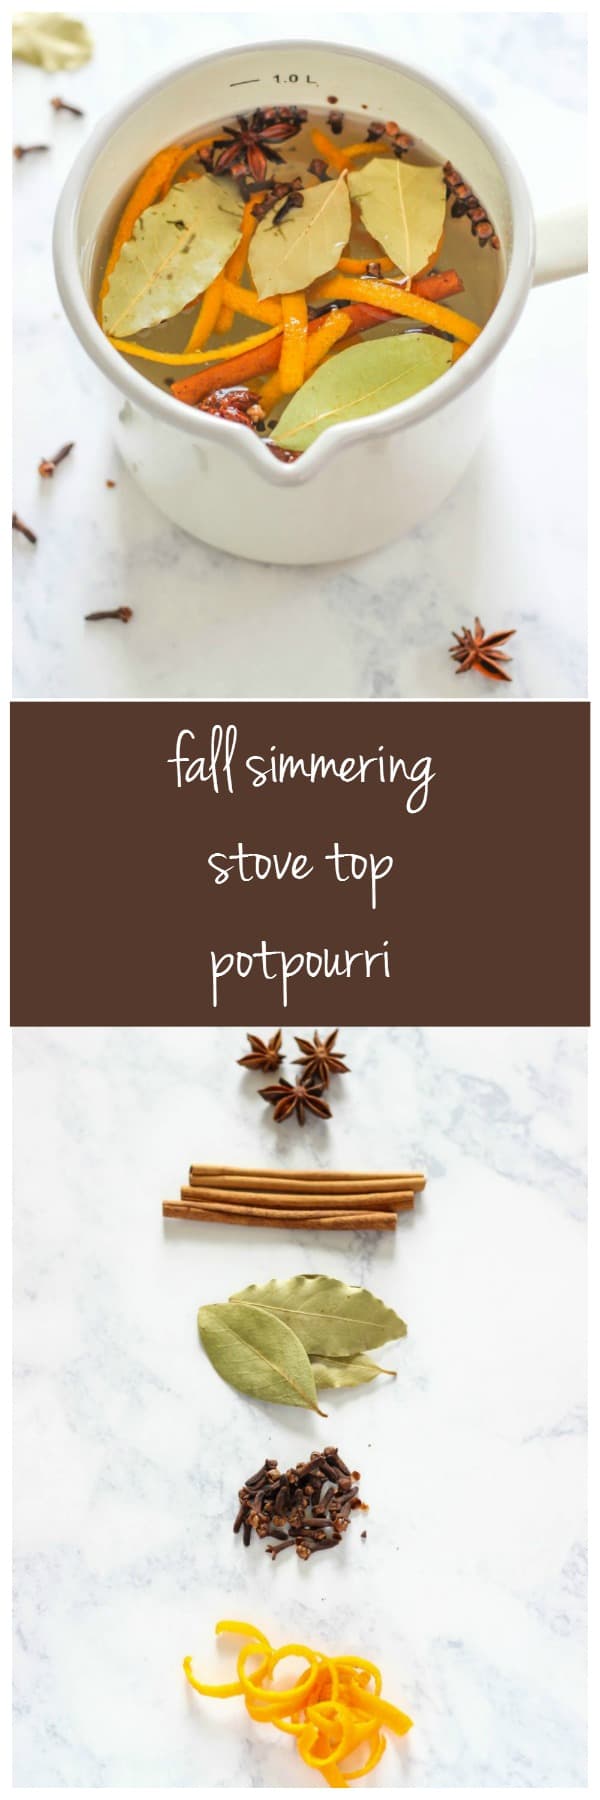 https://www.purelykatie.com/wp-content/uploads/2016/08/Fall-Simmering-Stove-Top-Potpourri-by-TheCasualCraftlete.com_.jpg